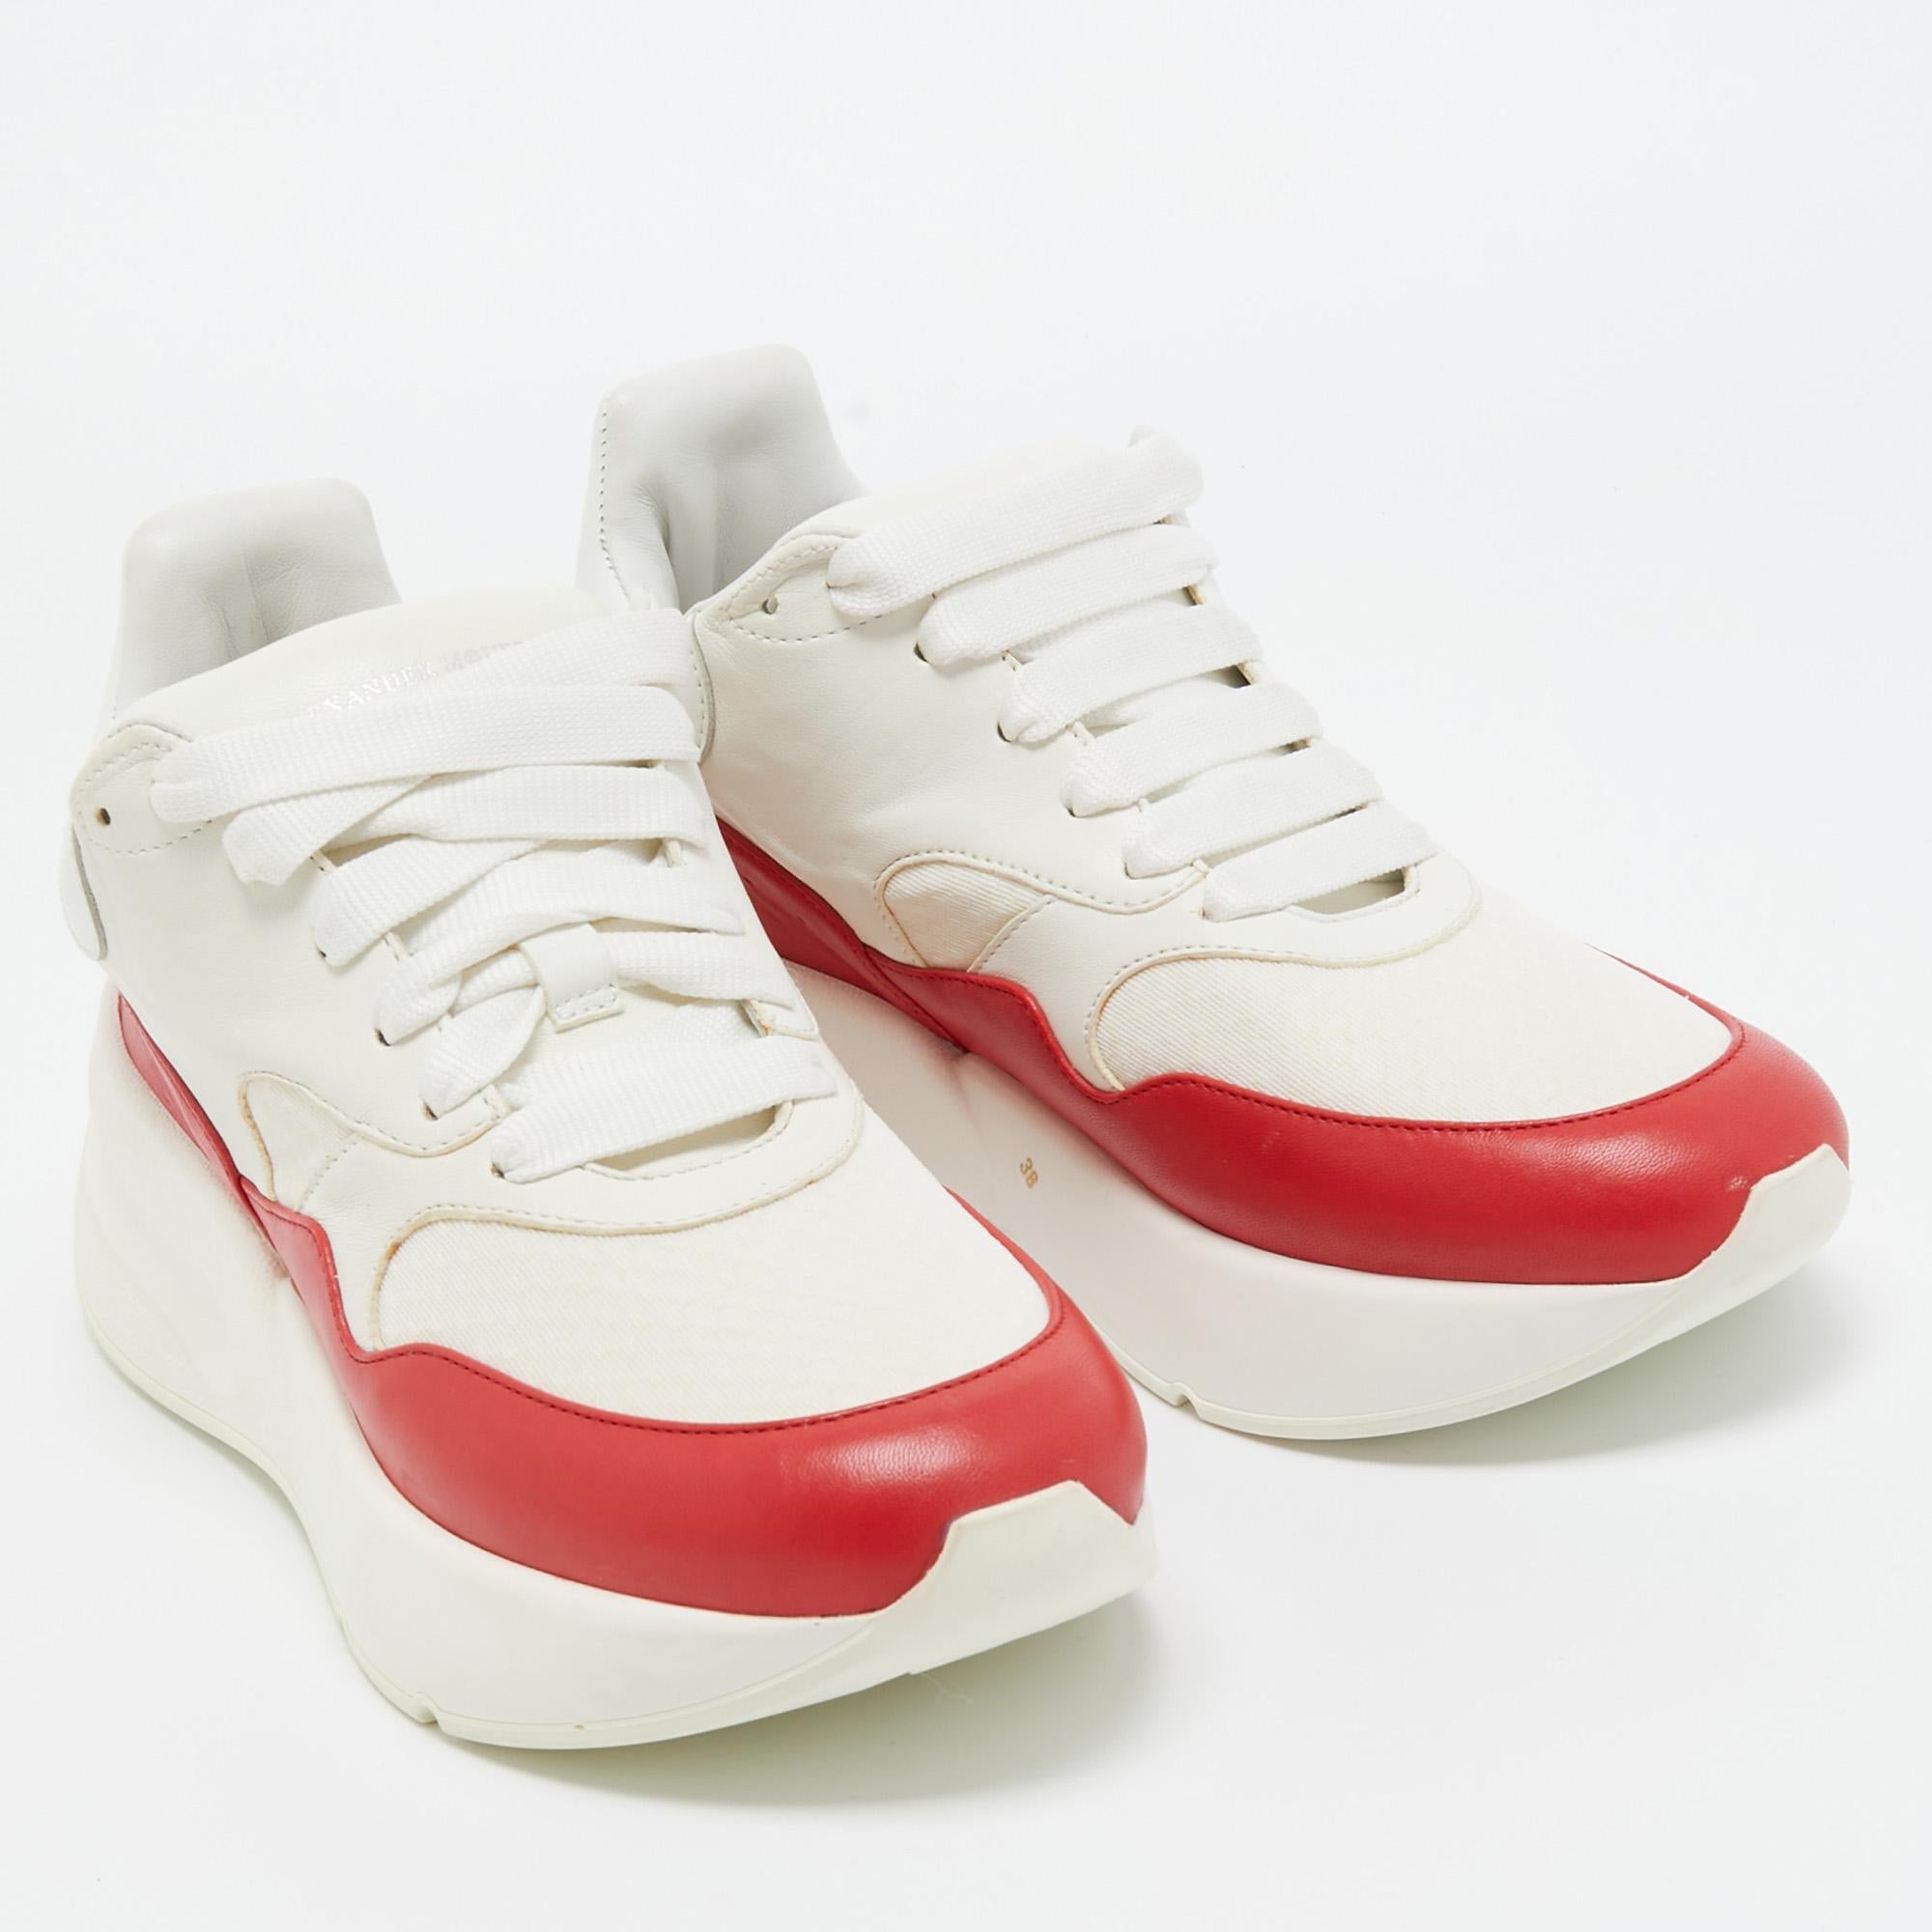 Alexander McQueen White/Red Leather and Canvas Larry Sneakers Size 38 1